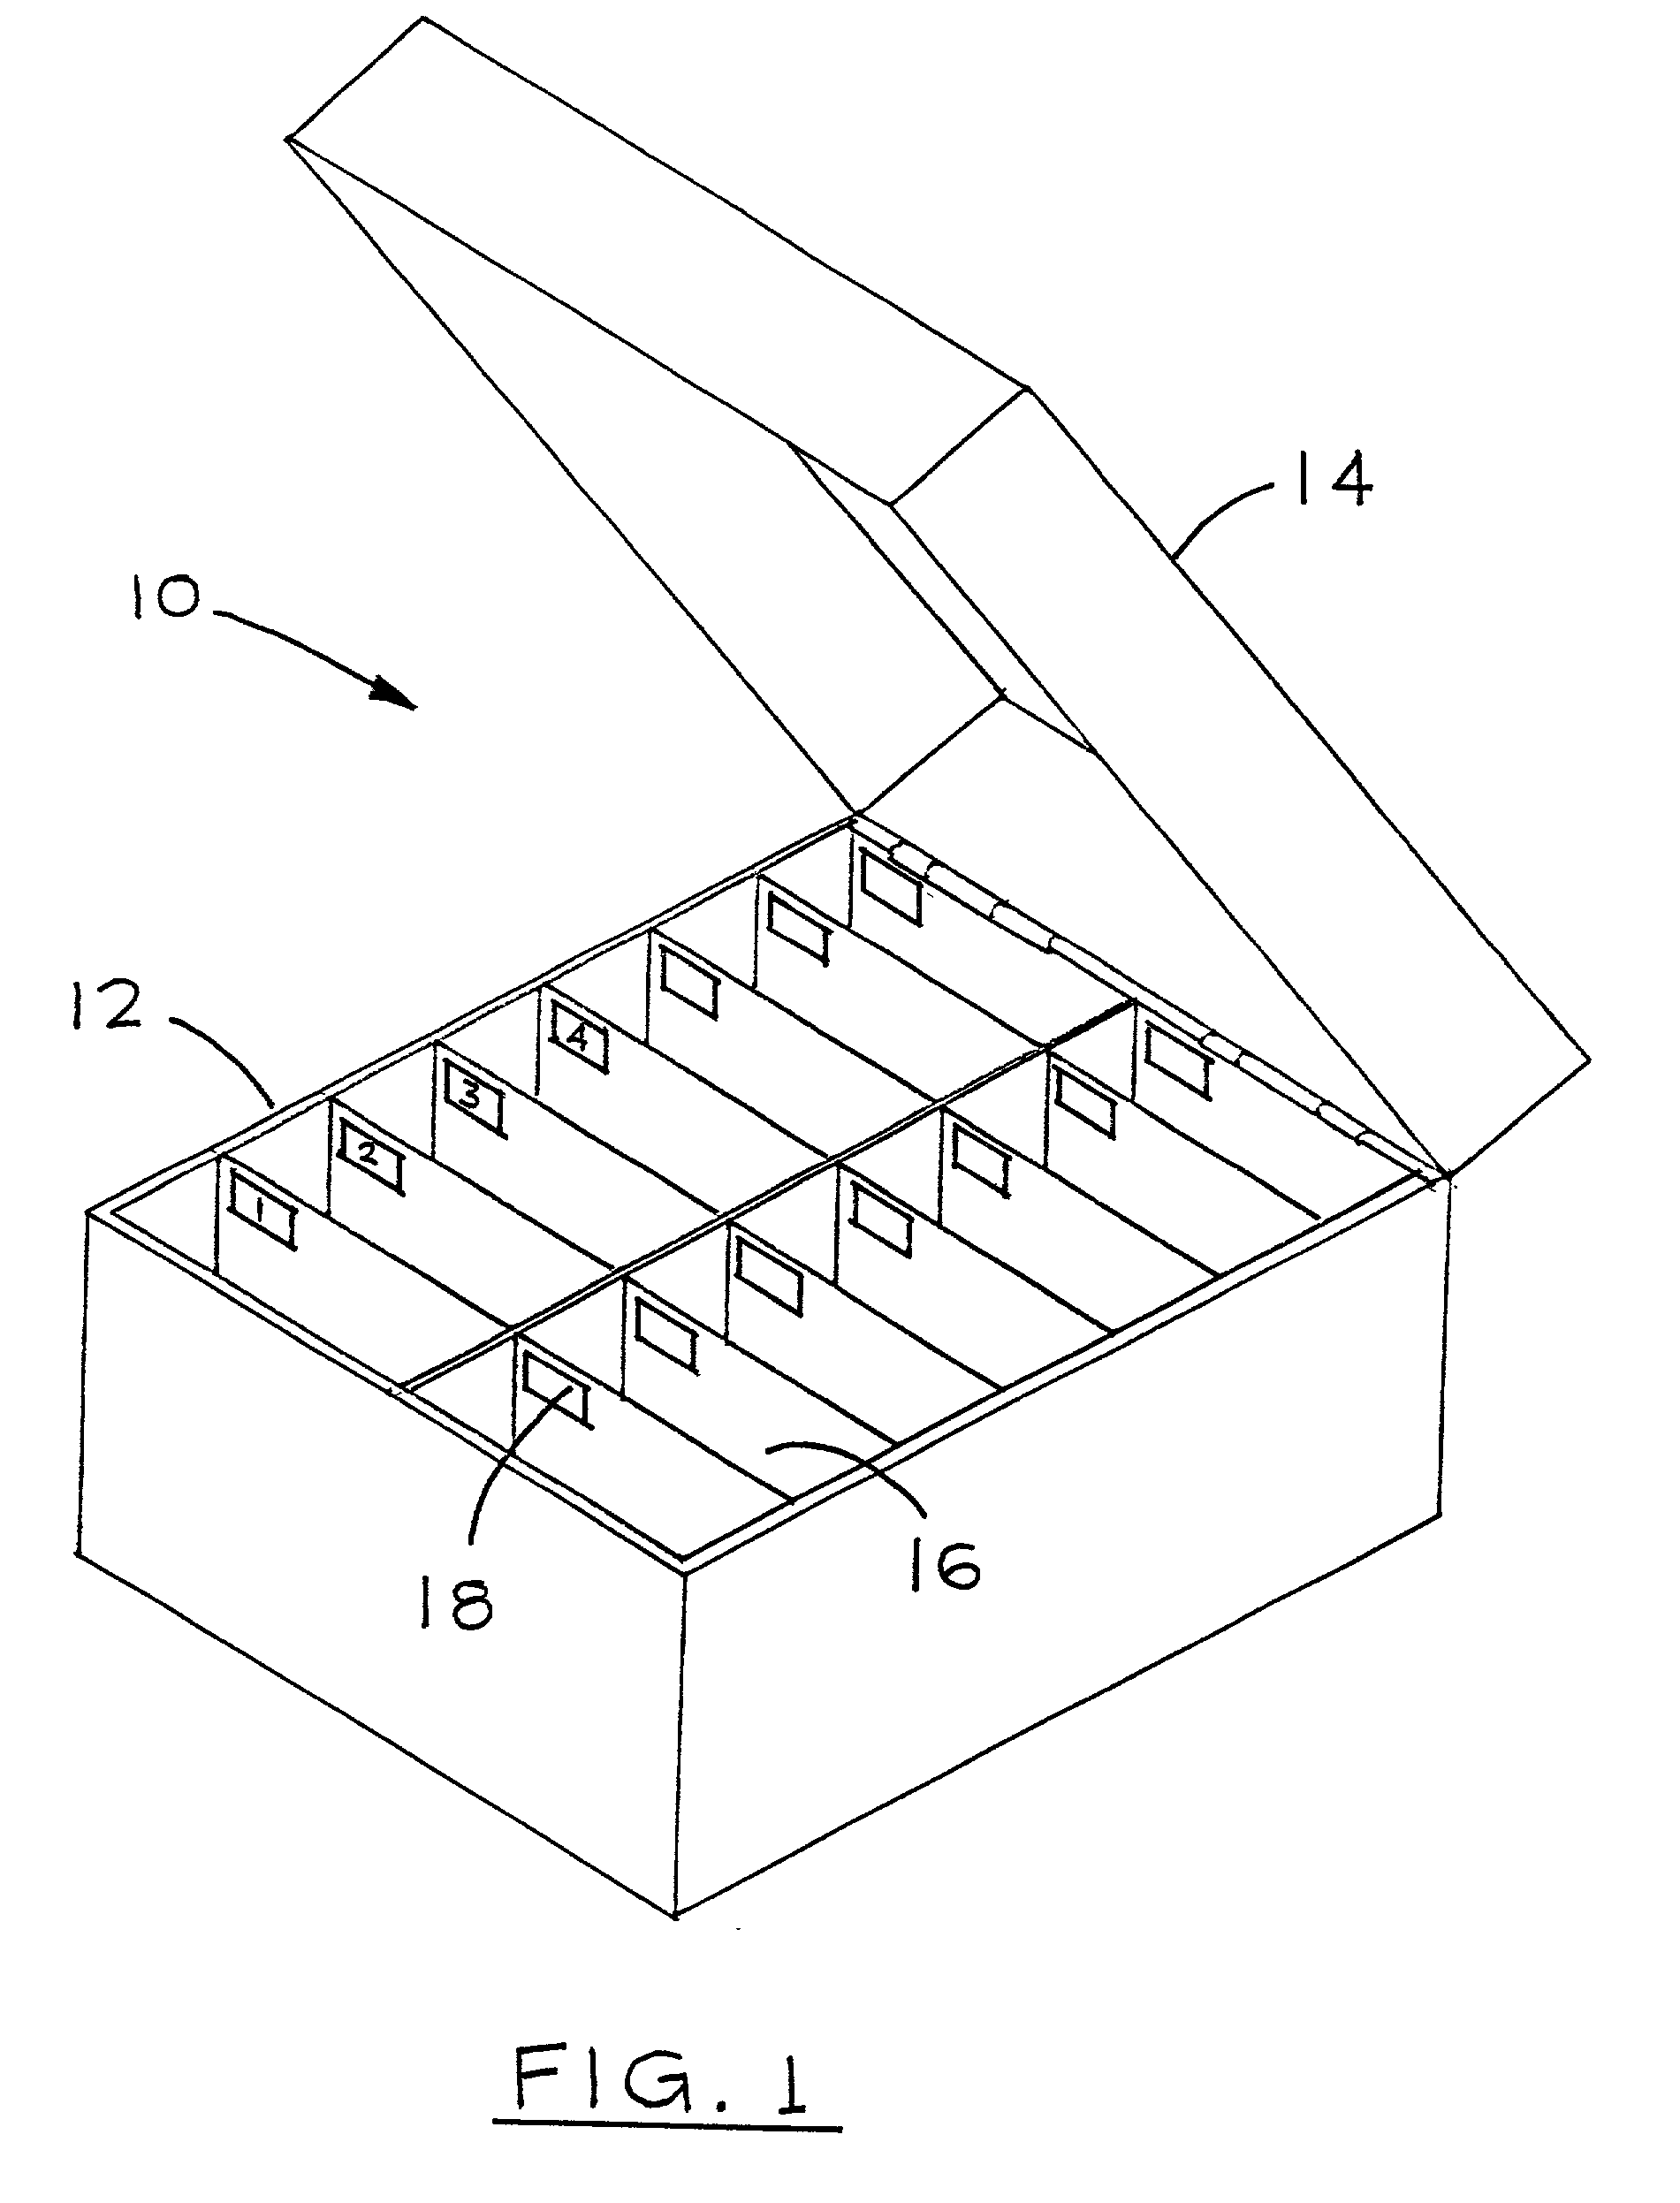 Apparatus for storing, identifying, and retrieving objects